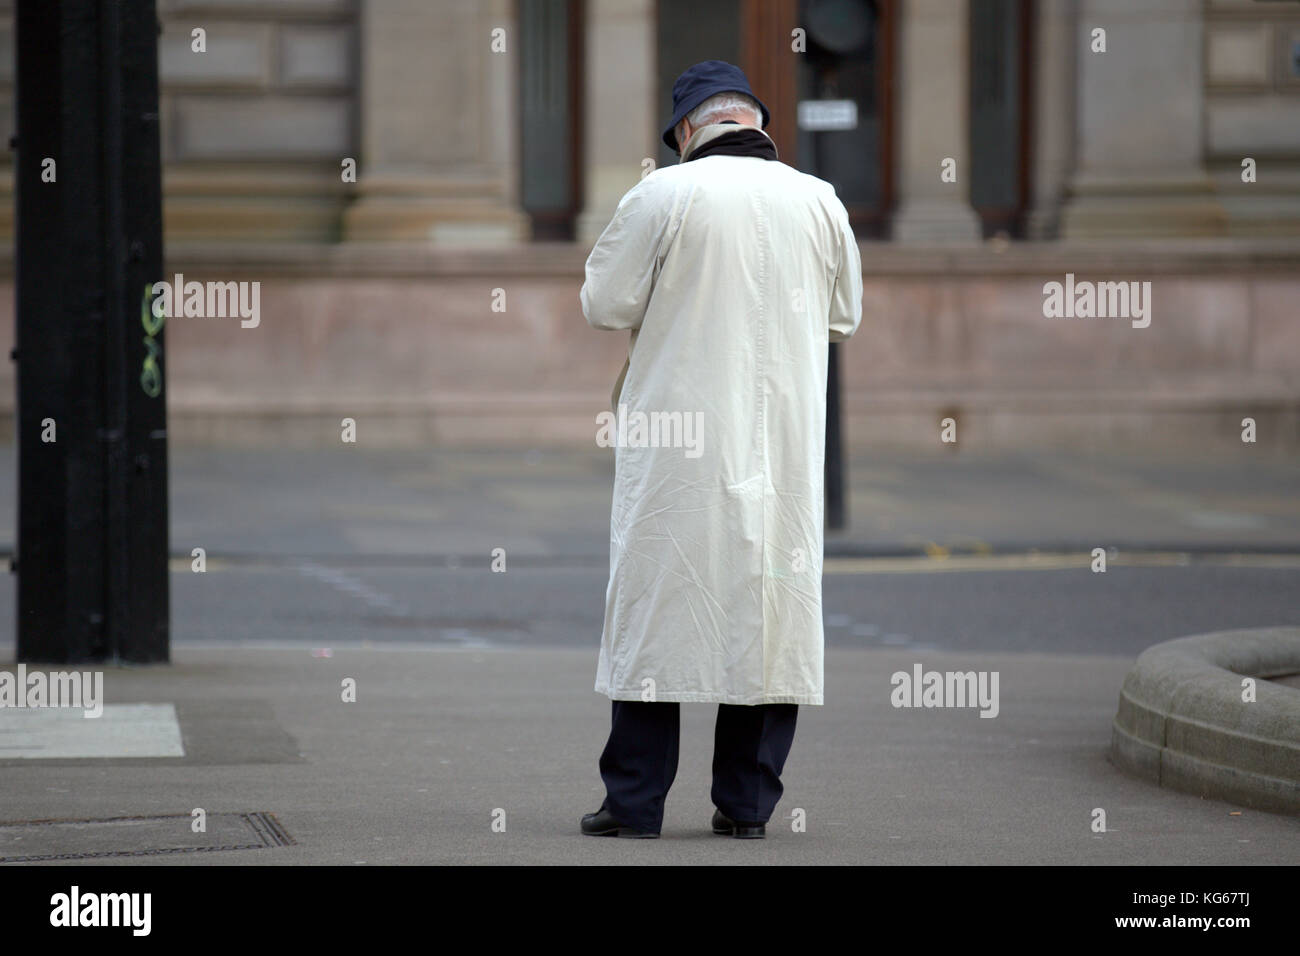 man in white raincoat  viewed from behind Stock Photo